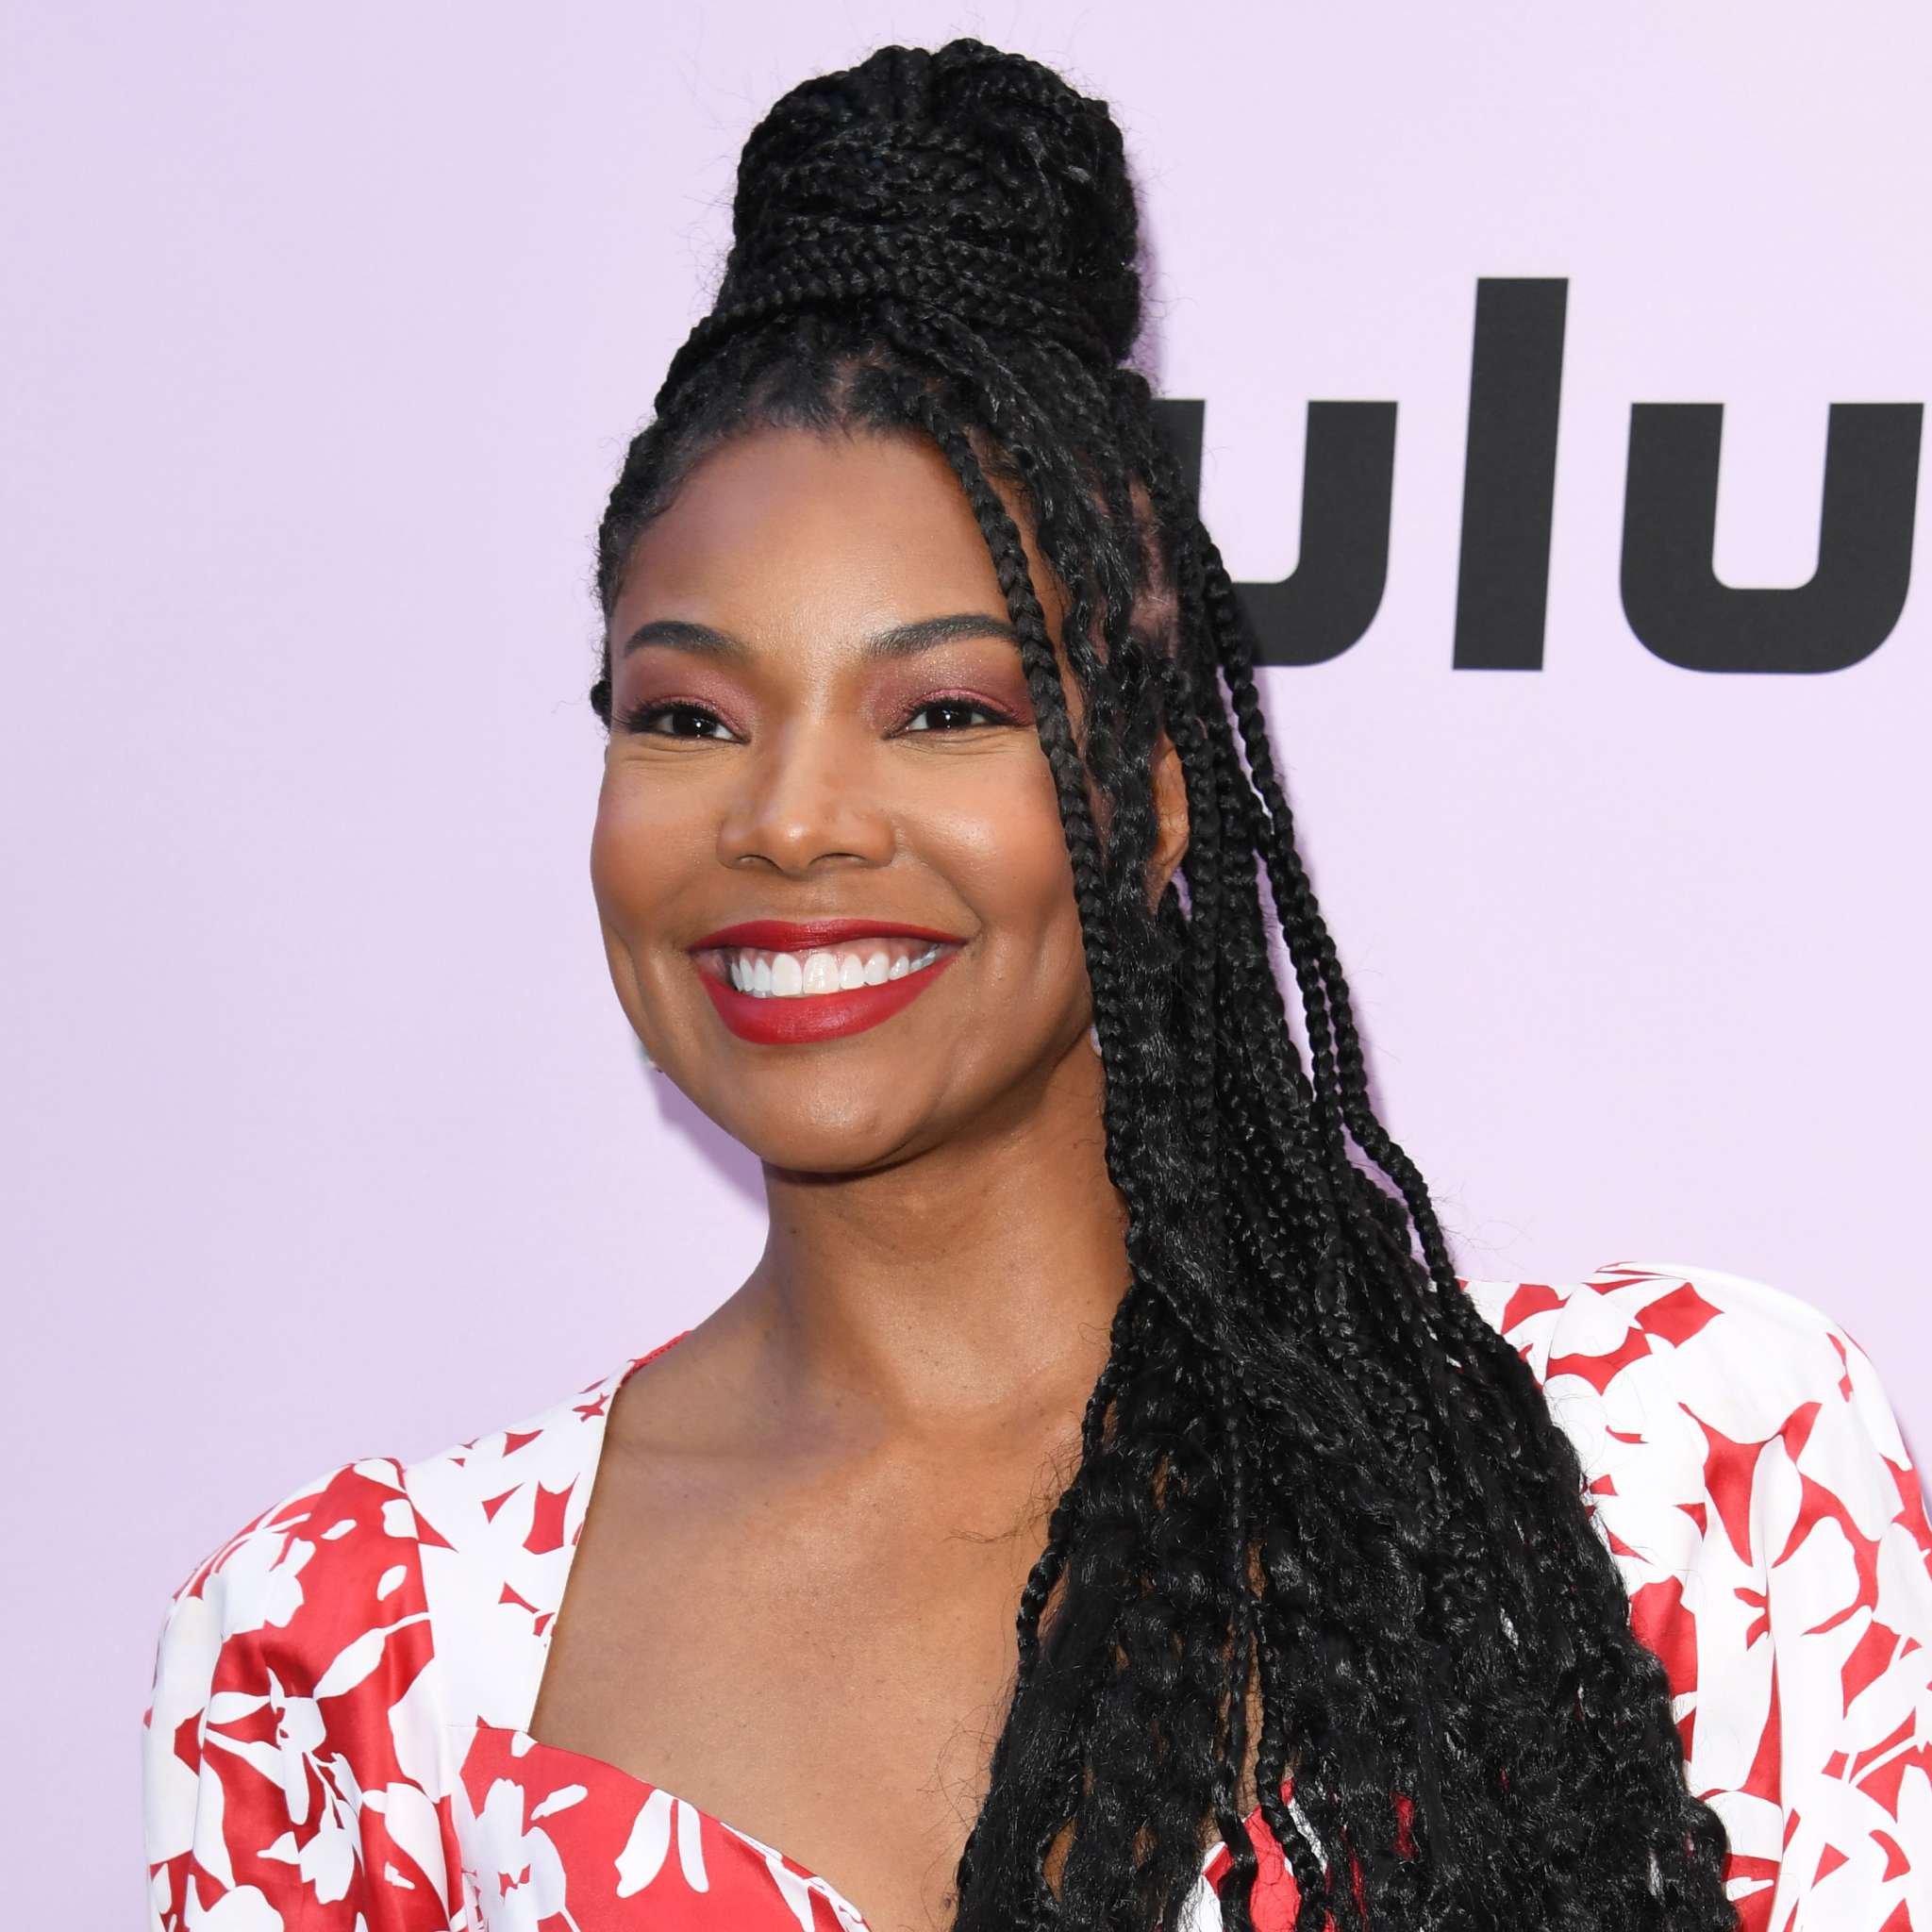 Gabrielle Union Gushes Over Lady London And Pens An Emotional Message